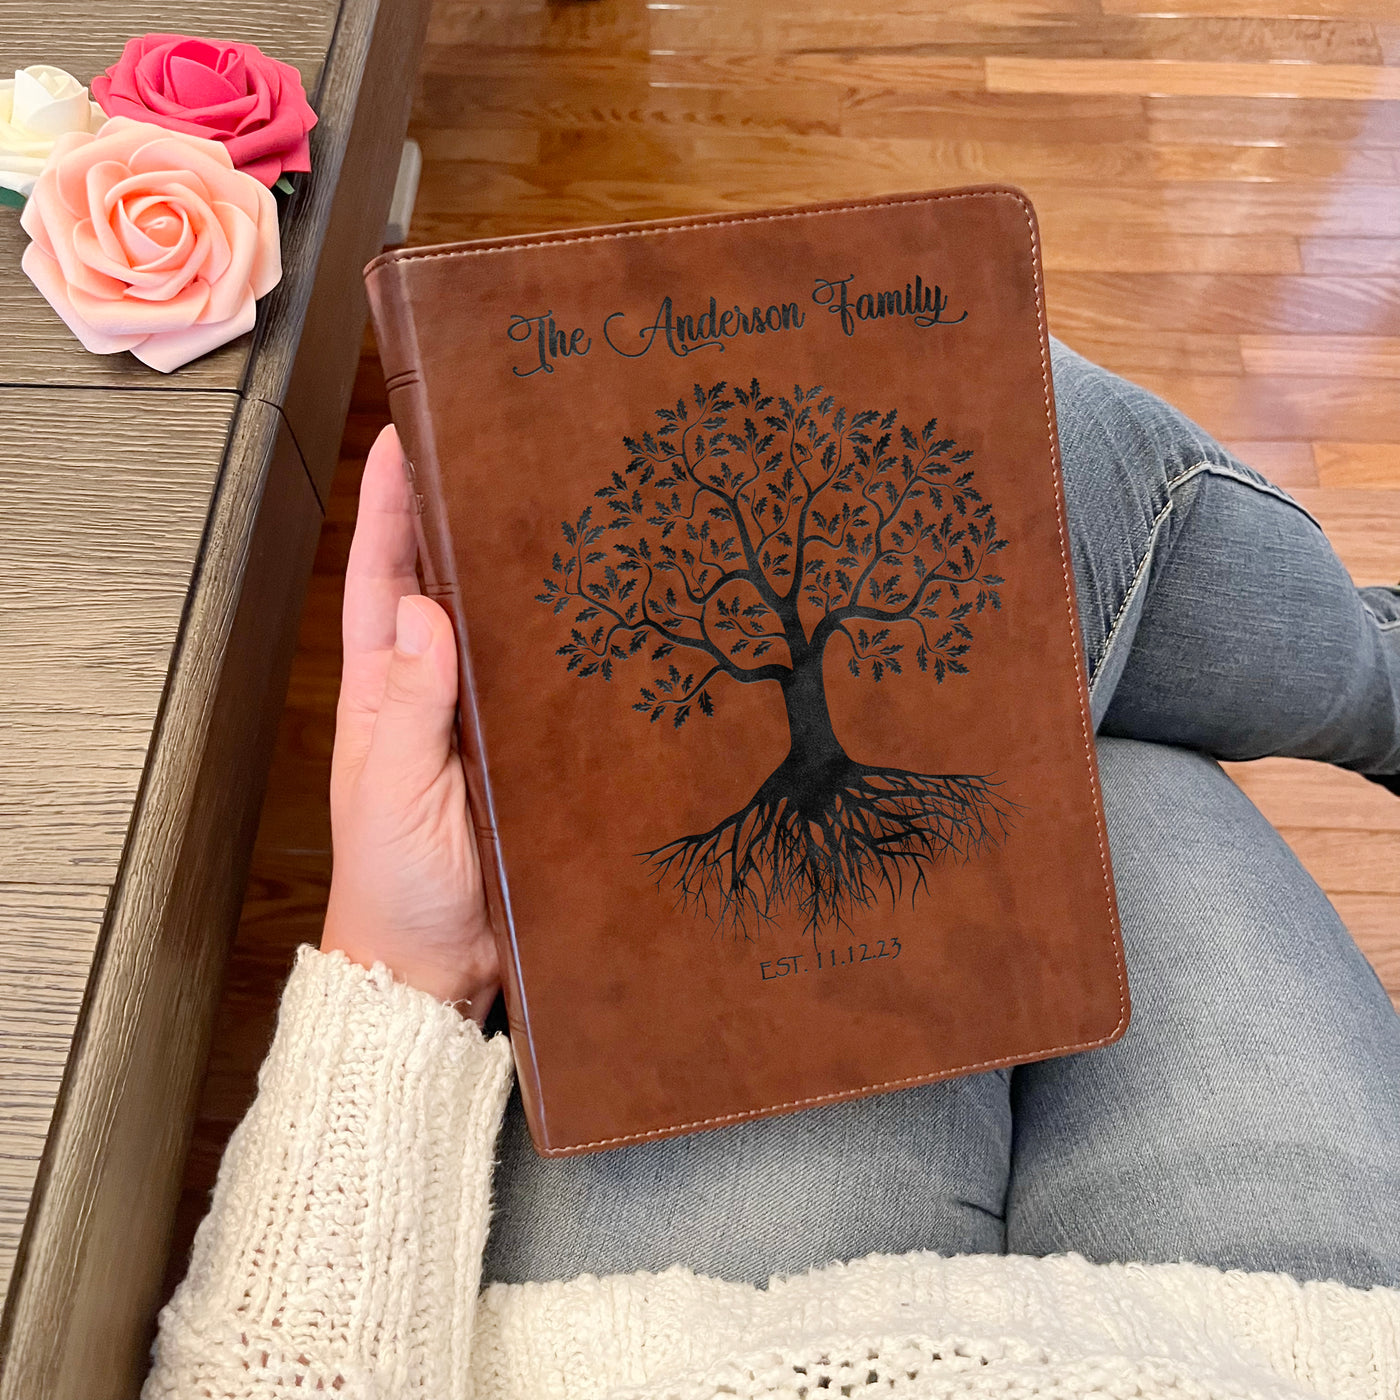 Personalized Family Bible | Custom ESV Family Bible | Engraved Family Bible Wedding Bible Christian Gifts Family Tree Bible for Wedding